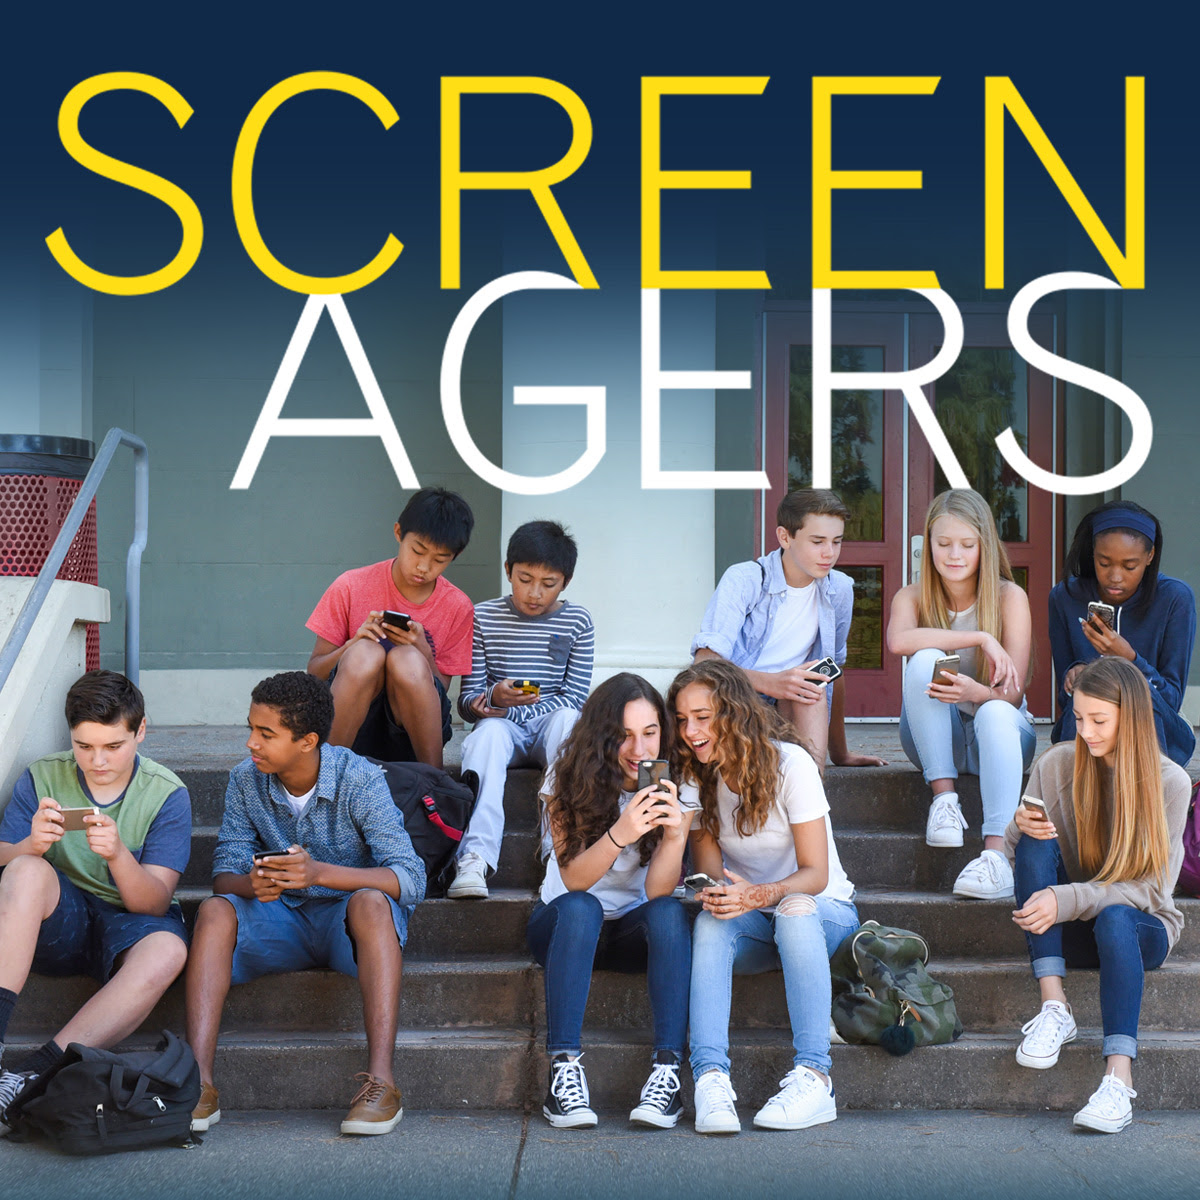 Screenagers Film Presented By St. Eugene Catholic Church